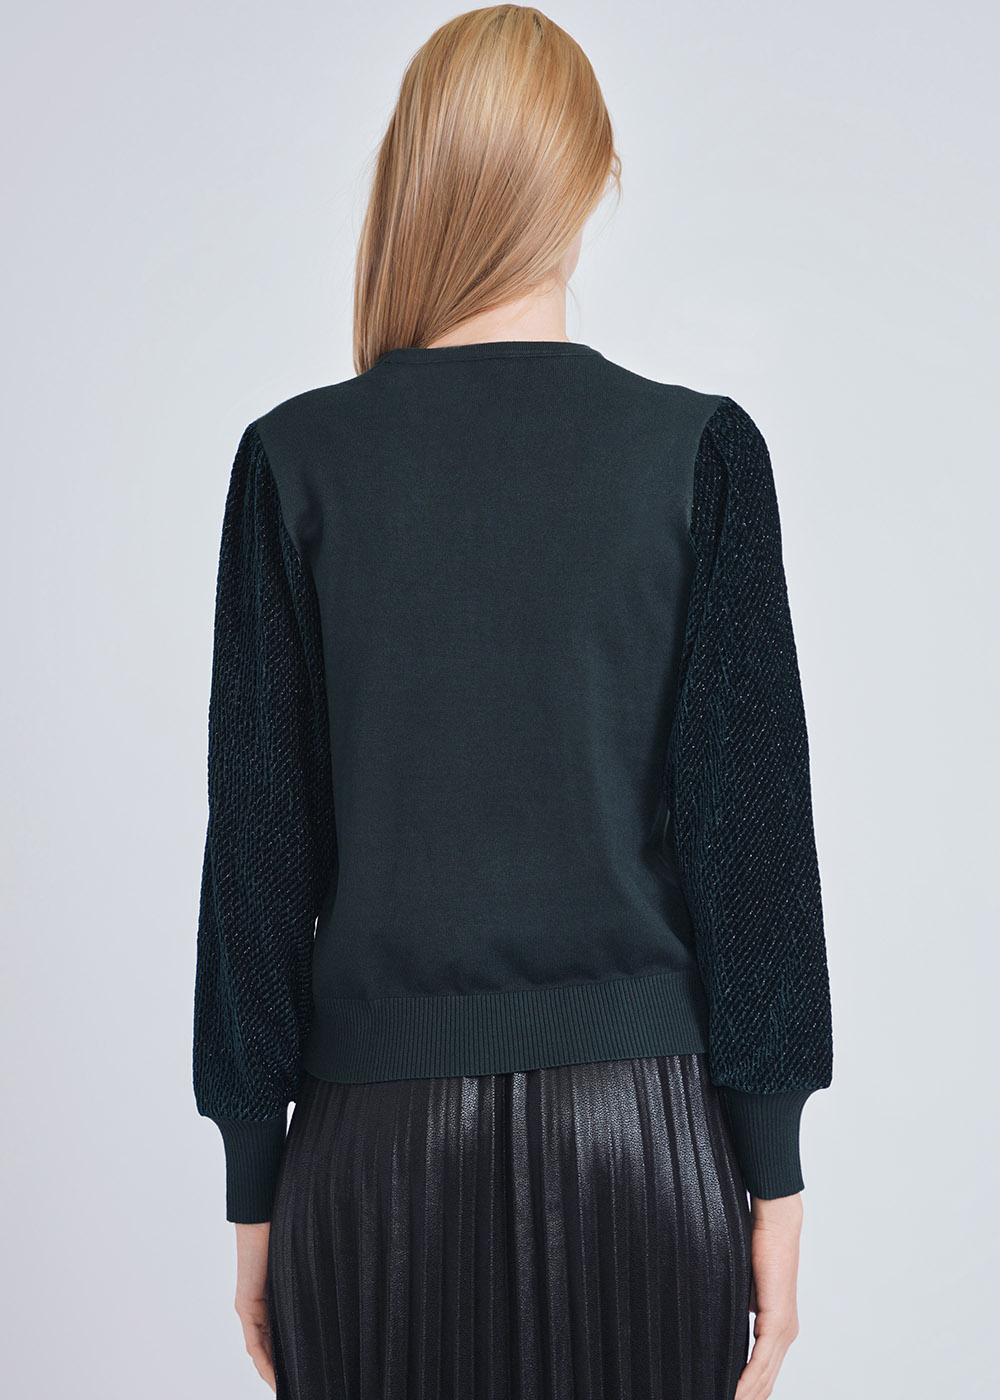 Unique Green Knit Top with Volume Sleeves